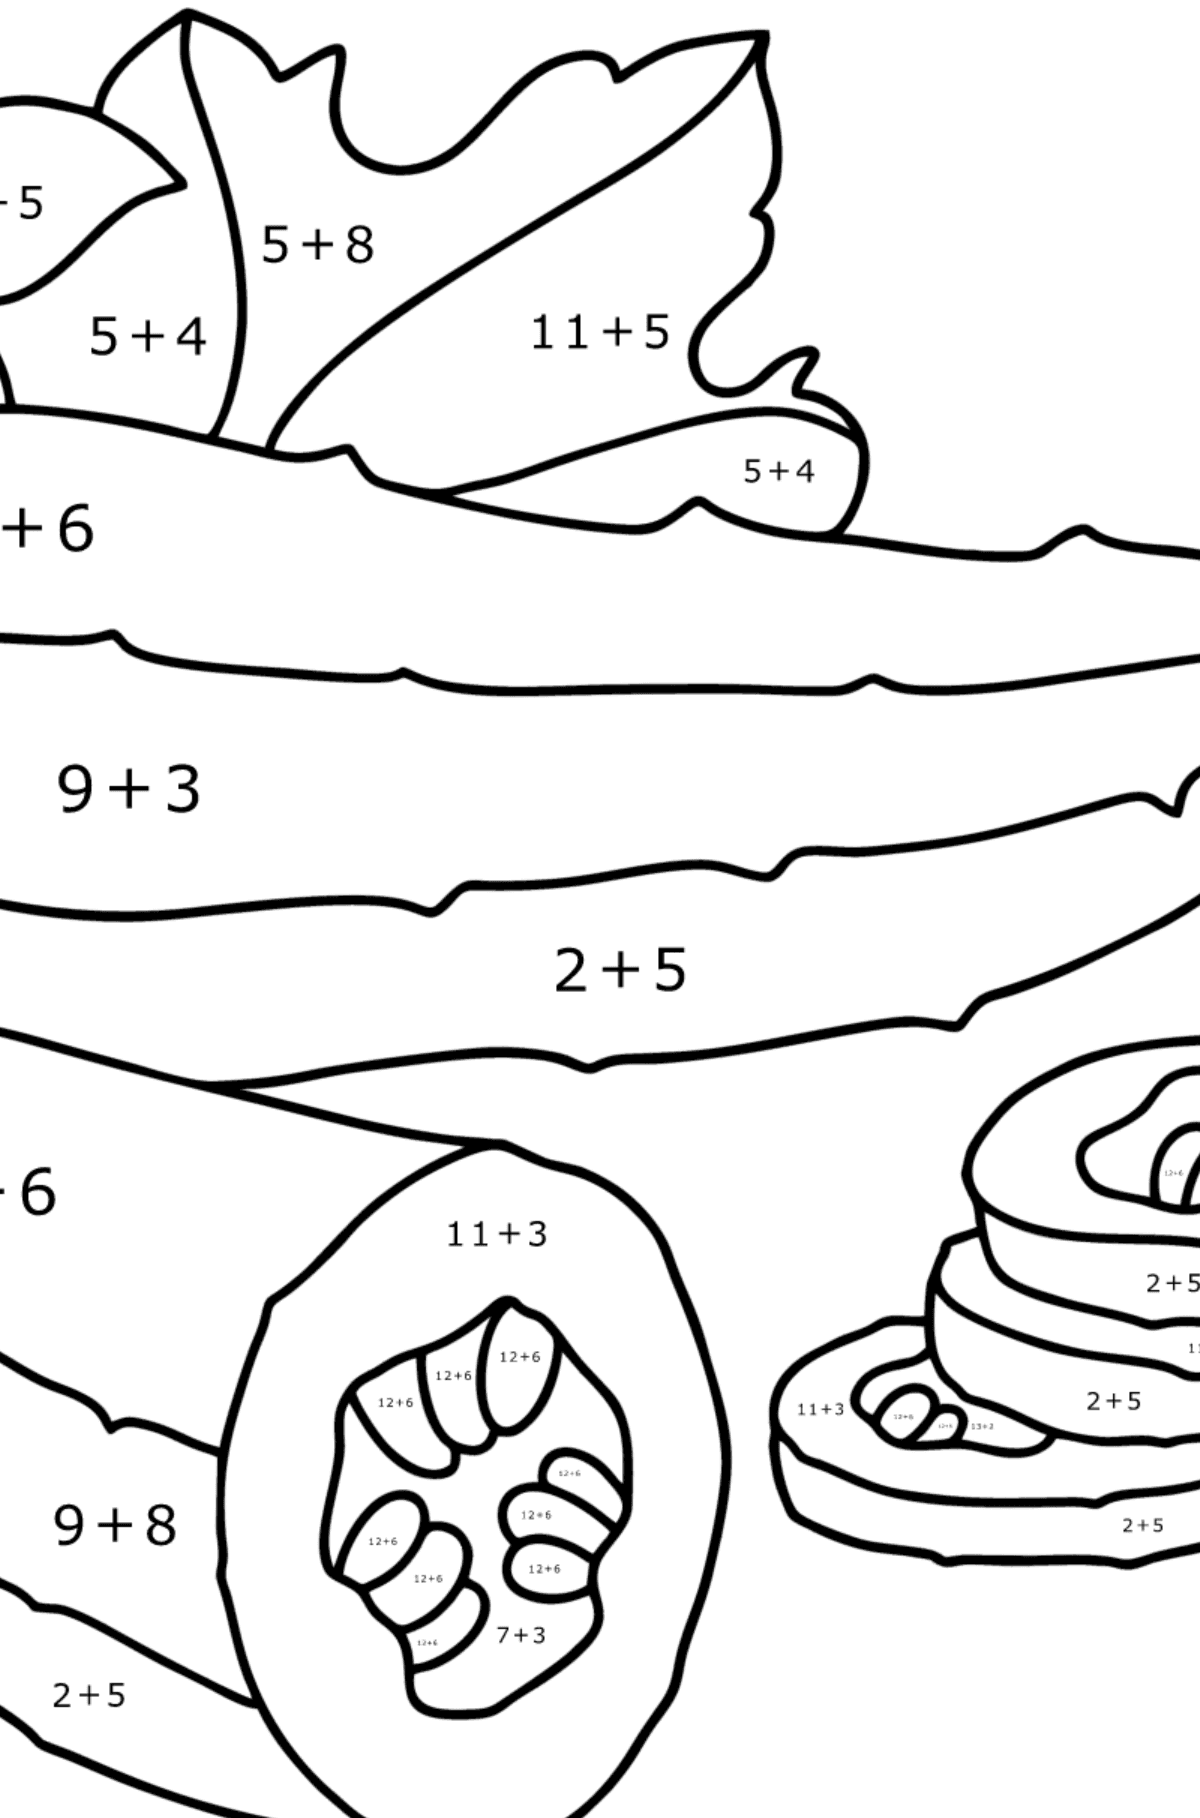 Fresh cucumbers сoloring page - Math Coloring - Addition for Kids